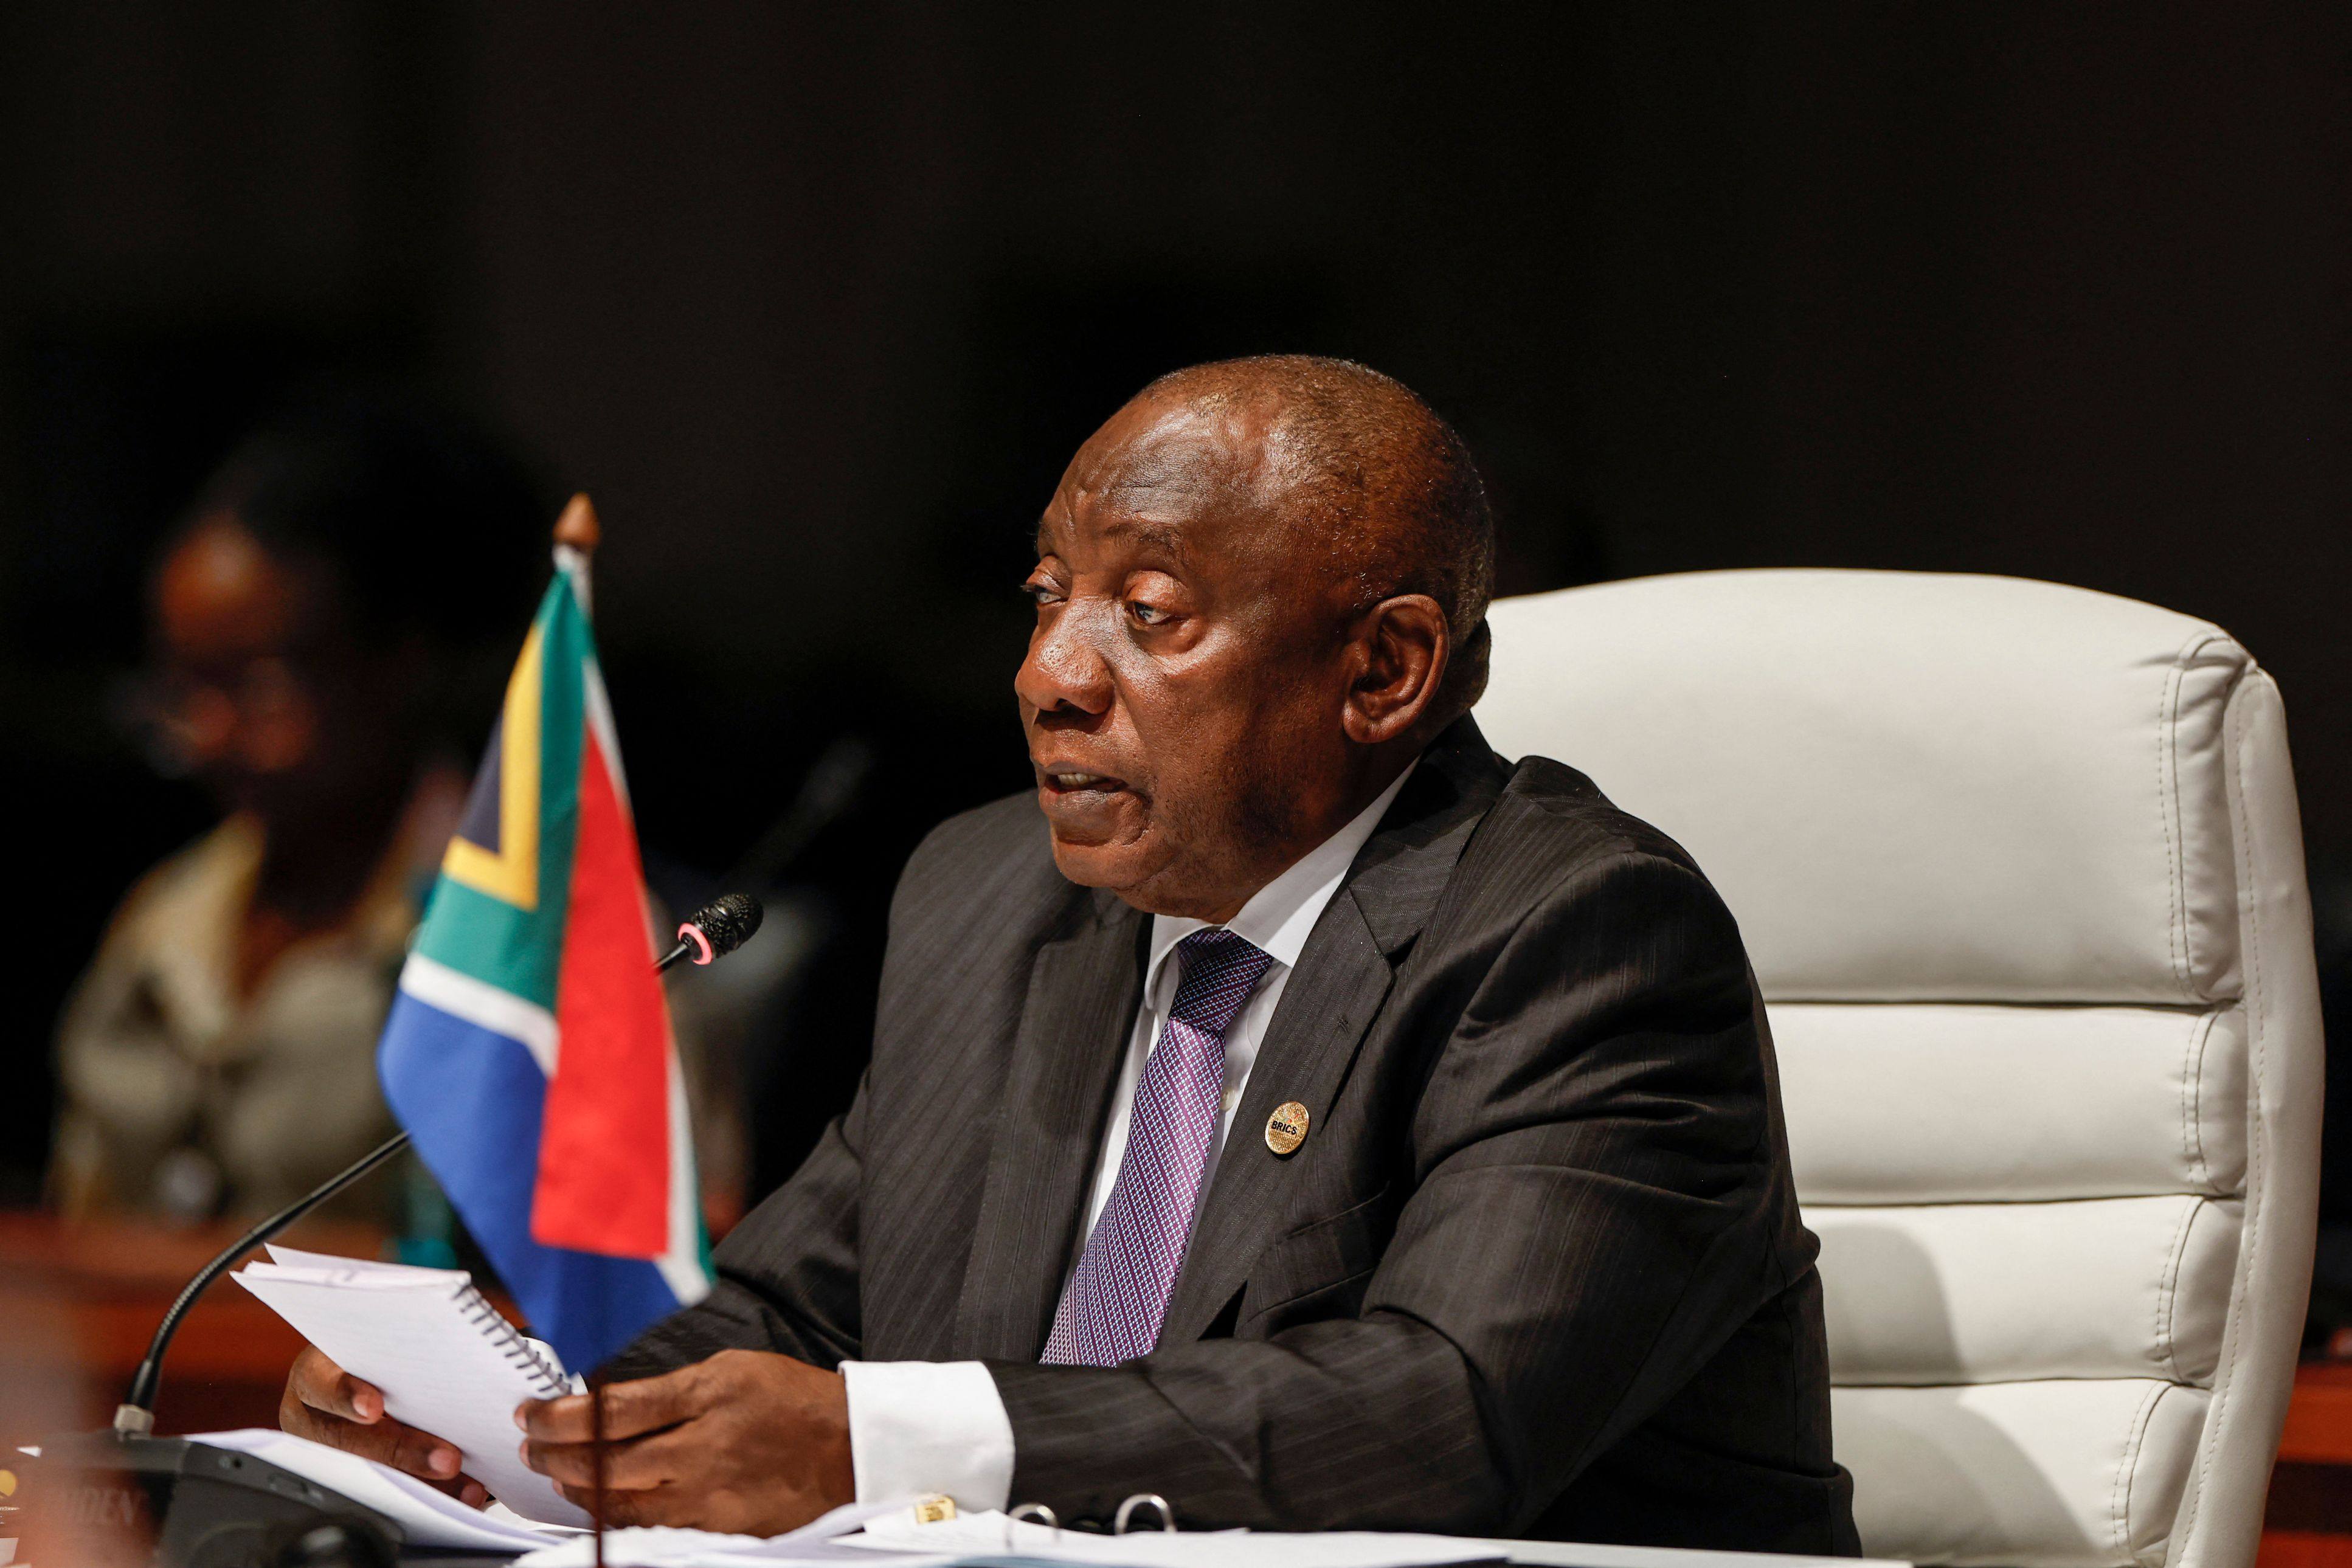 -South African President Cyril Ramaphosa accused Israel of war crimes and “genocide” in Gaza during a BRICS group of nations summit on Tuesday. Photo: Pool/AFP